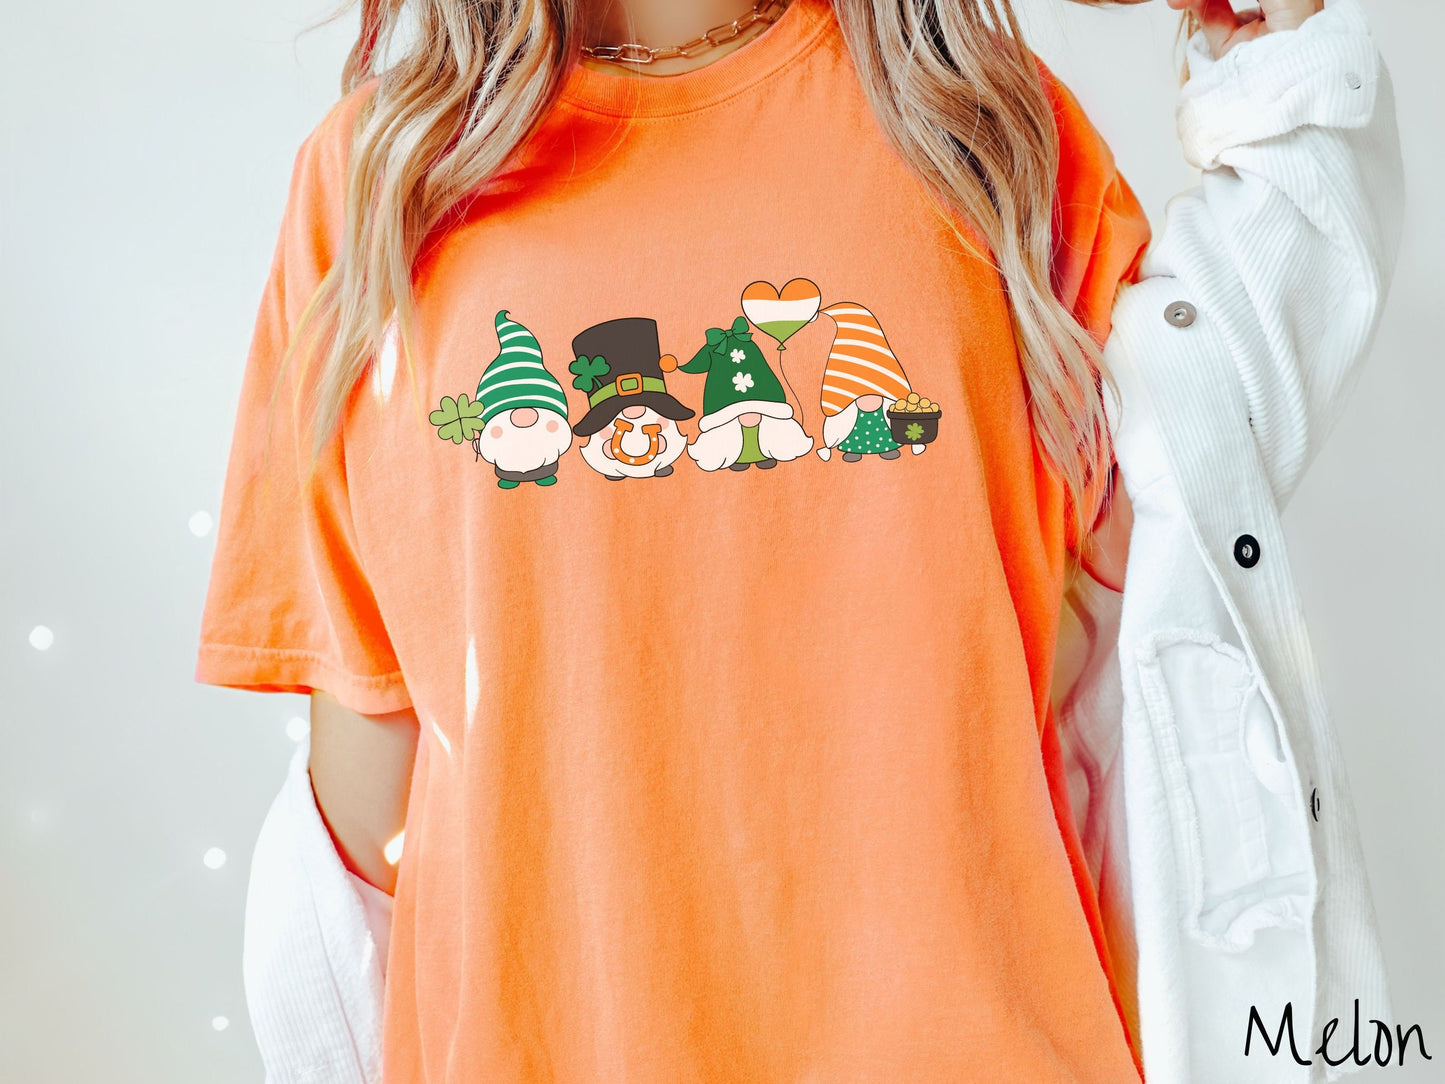 A woman wearing a vintage, melon colored shirt with four festive gnomes wearing varying green, white, and orange hats holding a green clover, an inflatable balloon, an orange horse shoe, and a pot of gold.